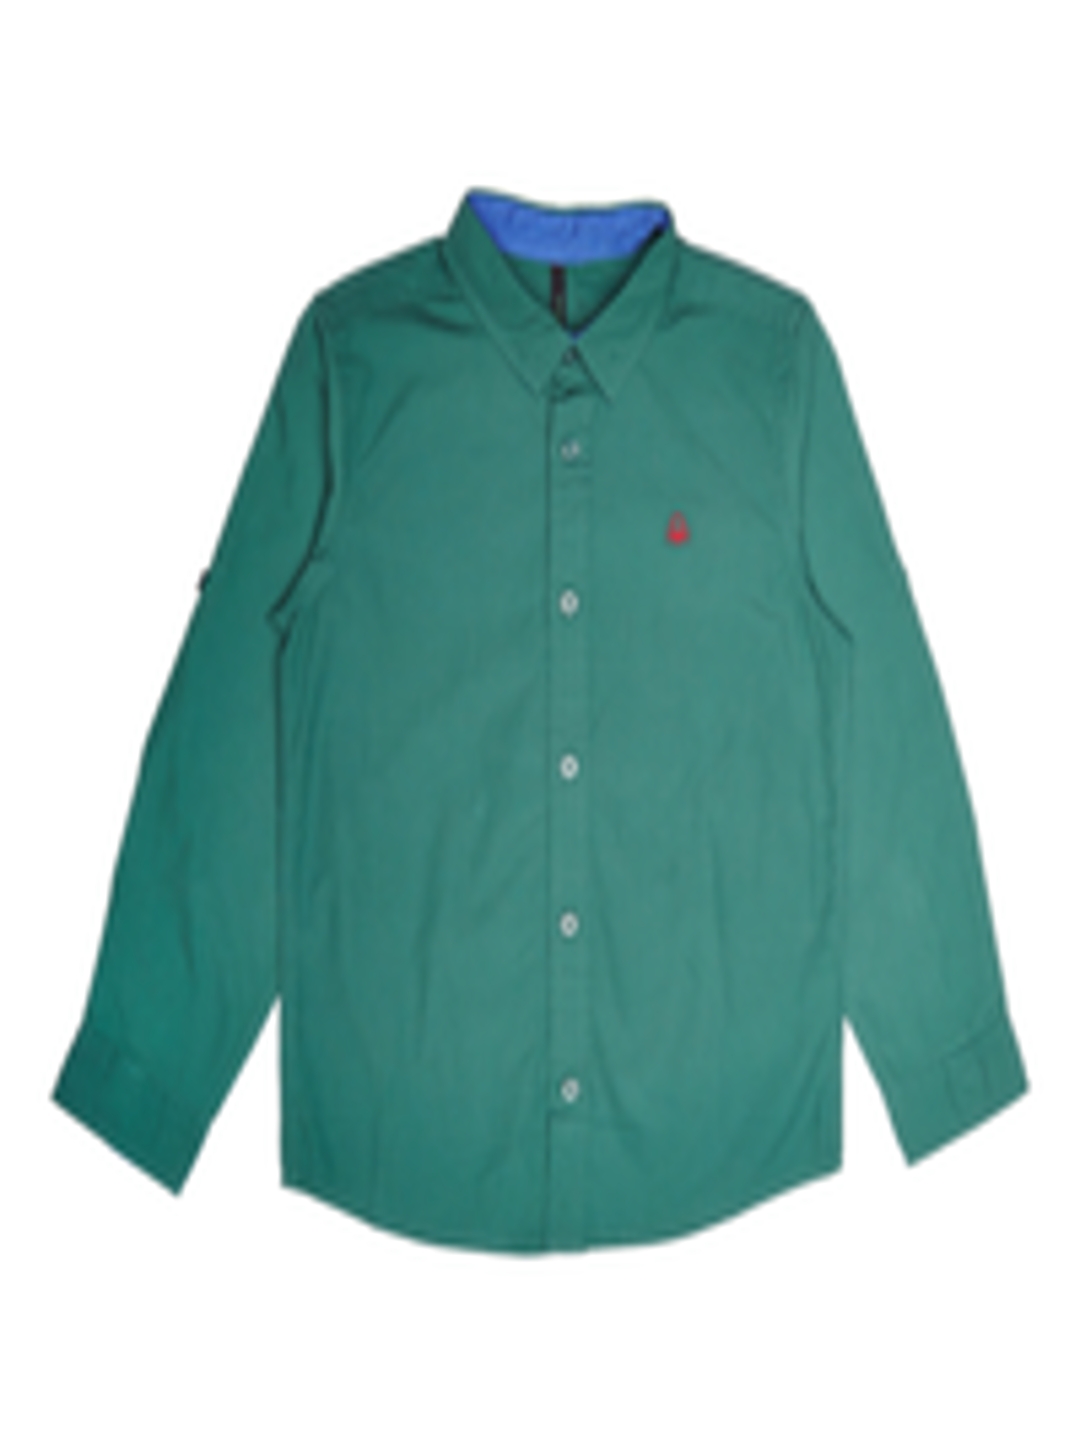 Buy United Colors Of Benetton Boys Green Regular Fit Solid Casual Shirt ...